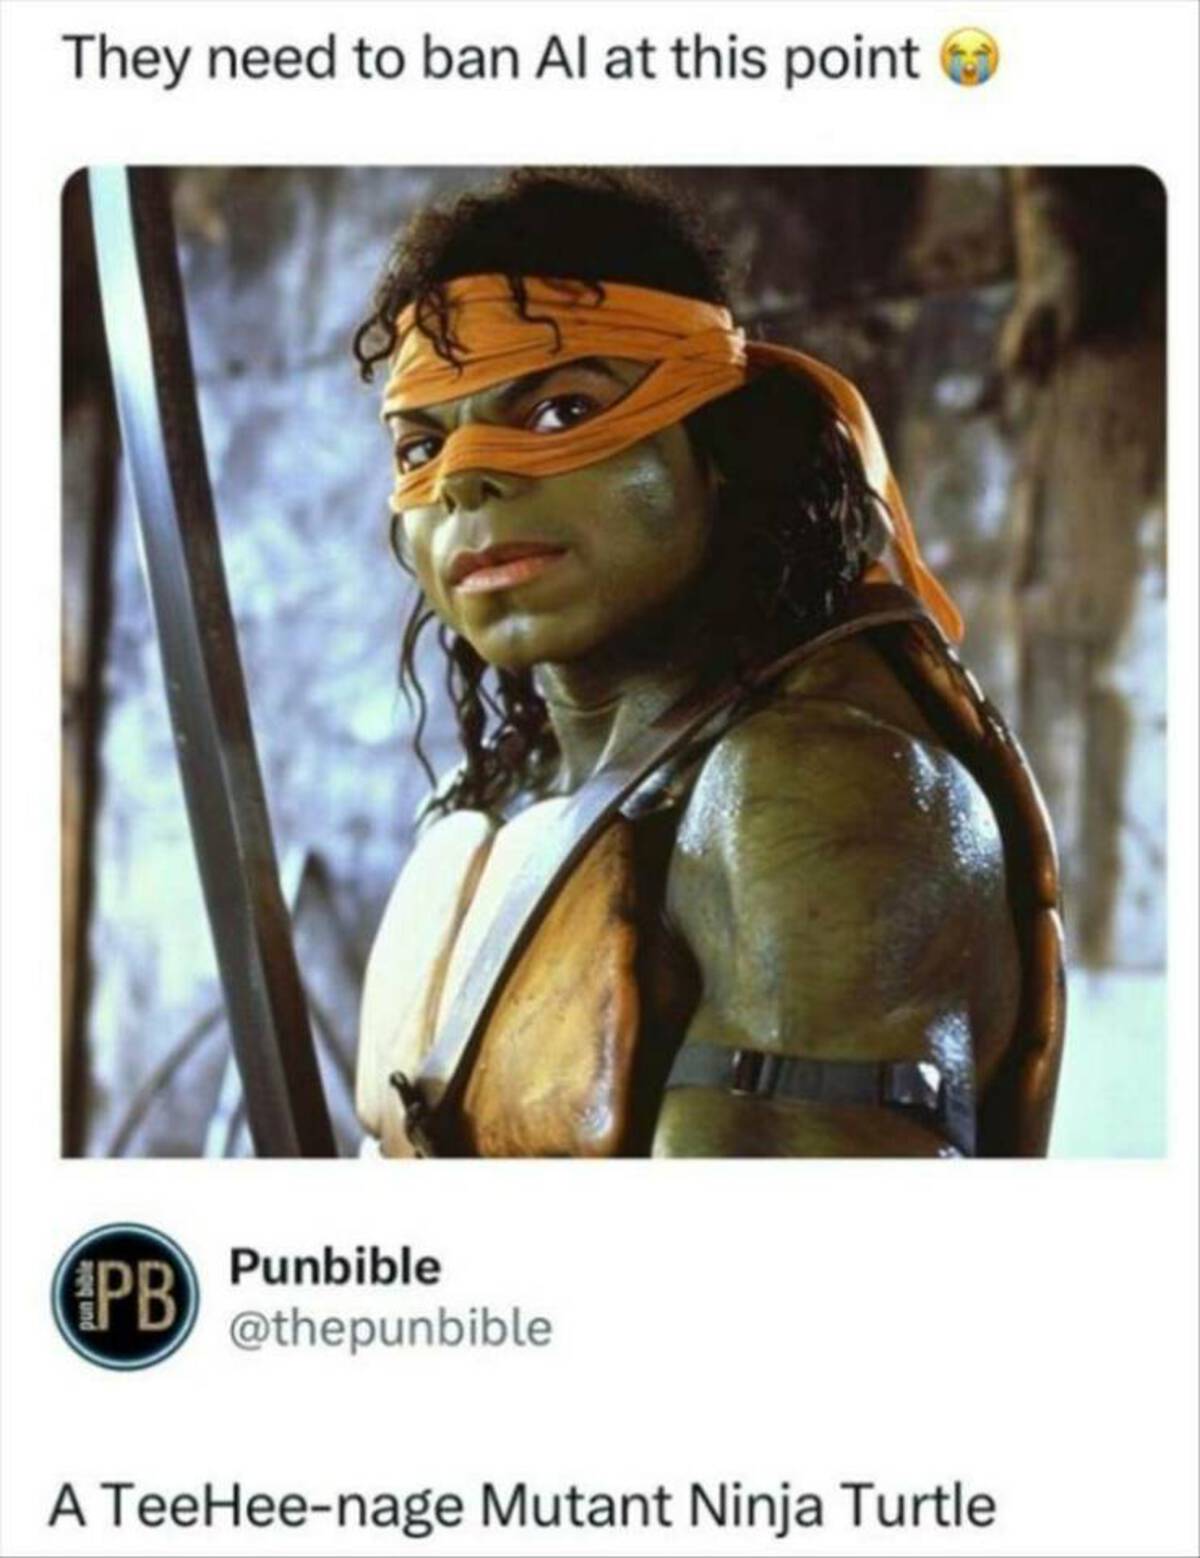 photo caption - They need to ban Al at this point pun bible Punbible A TeeHeenage Mutant Ninja Turtle